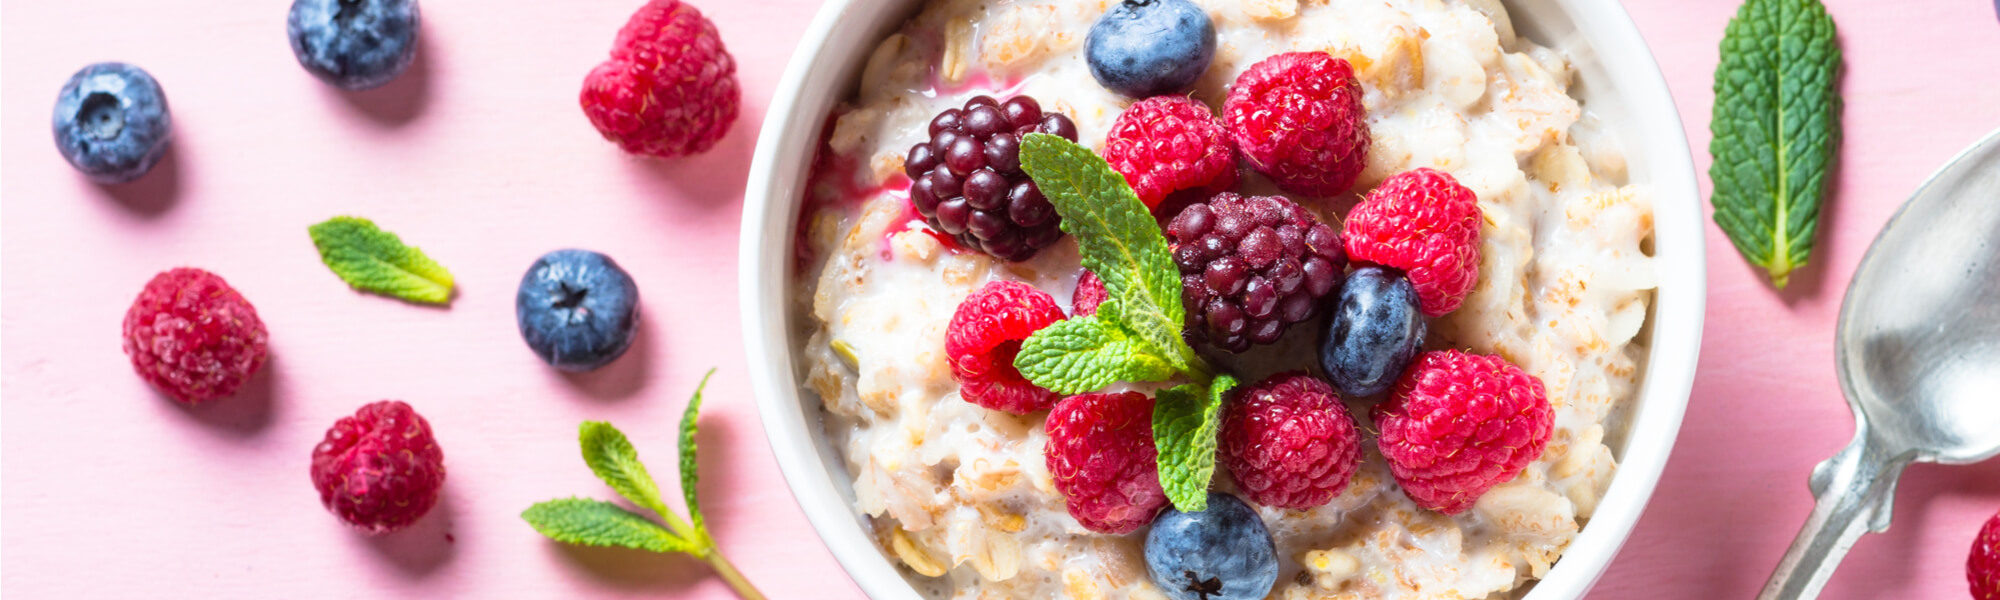 Oatmeal and Constipation: Is it Good or the Cause of It?